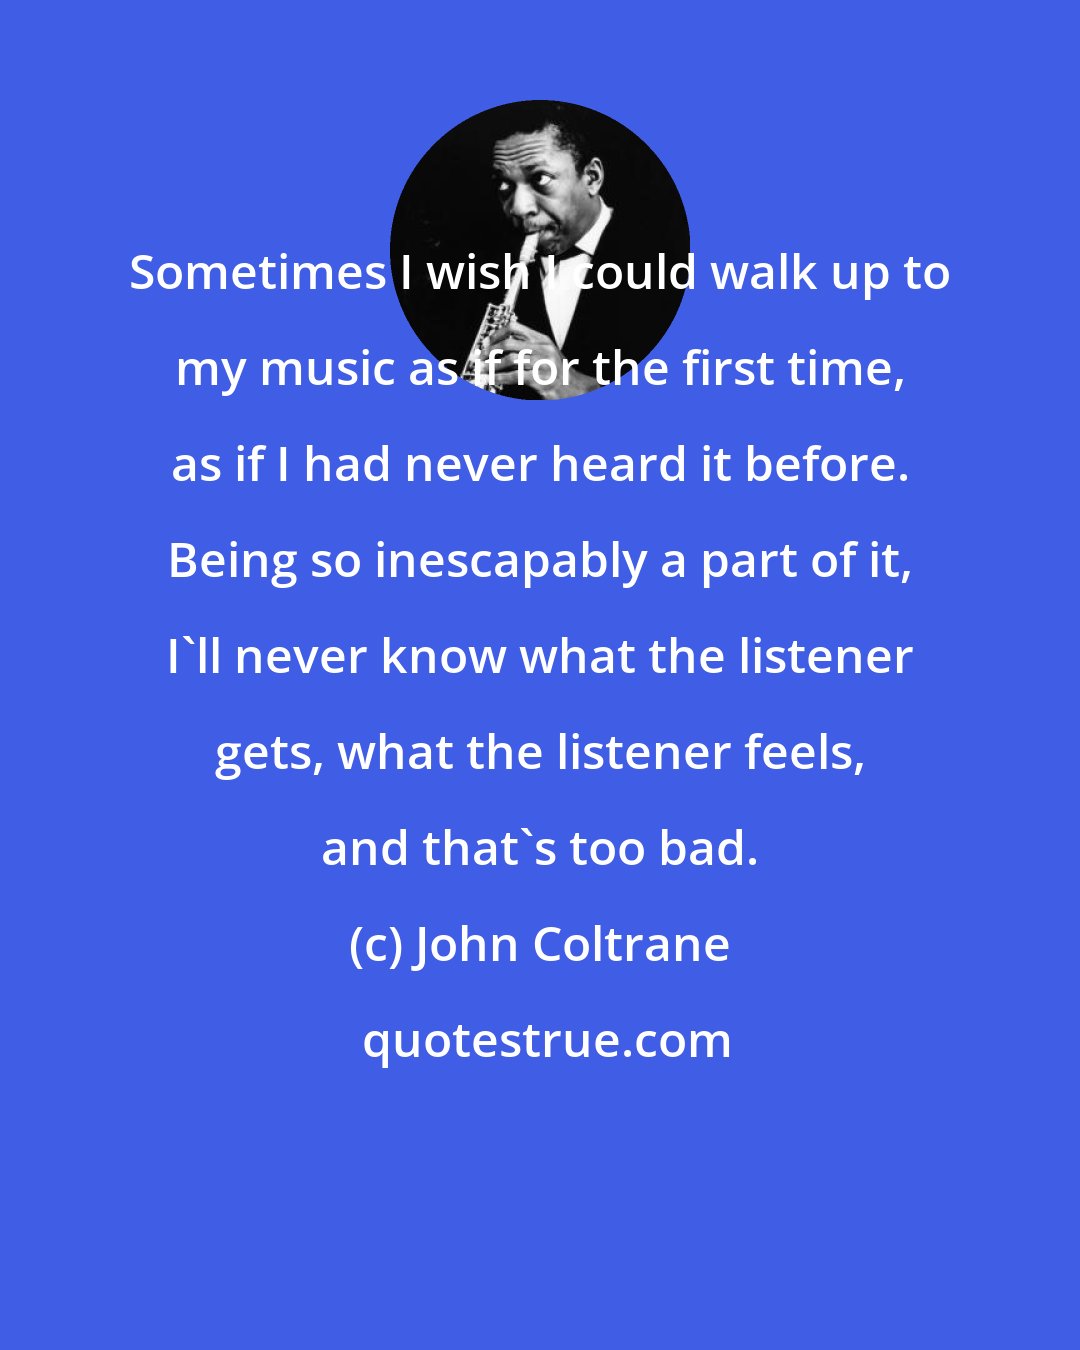 John Coltrane: Sometimes I wish I could walk up to my music as if for the first time, as if I had never heard it before. Being so inescapably a part of it, I'll never know what the listener gets, what the listener feels, and that's too bad.